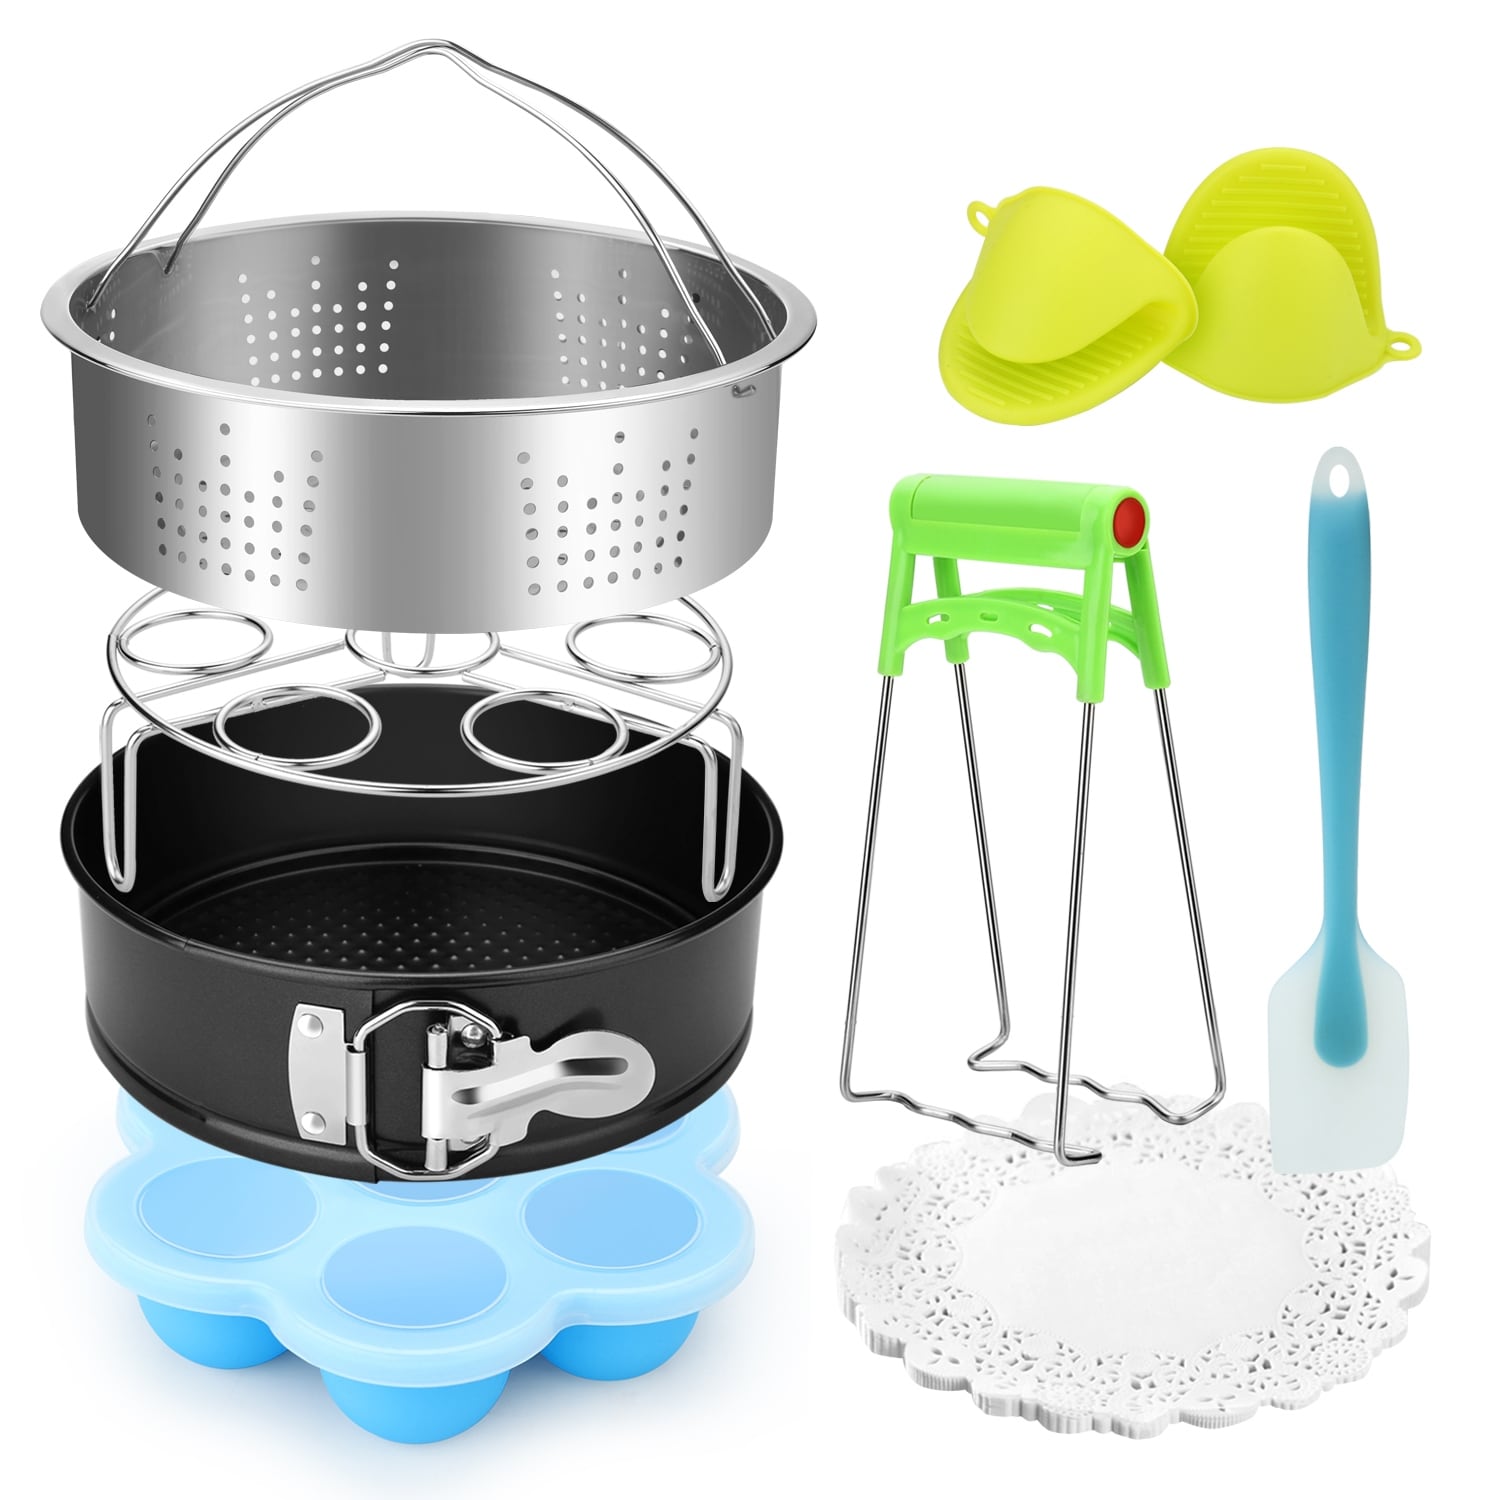 Norpro Silicone Double Egg Poacher – The Happy Cook